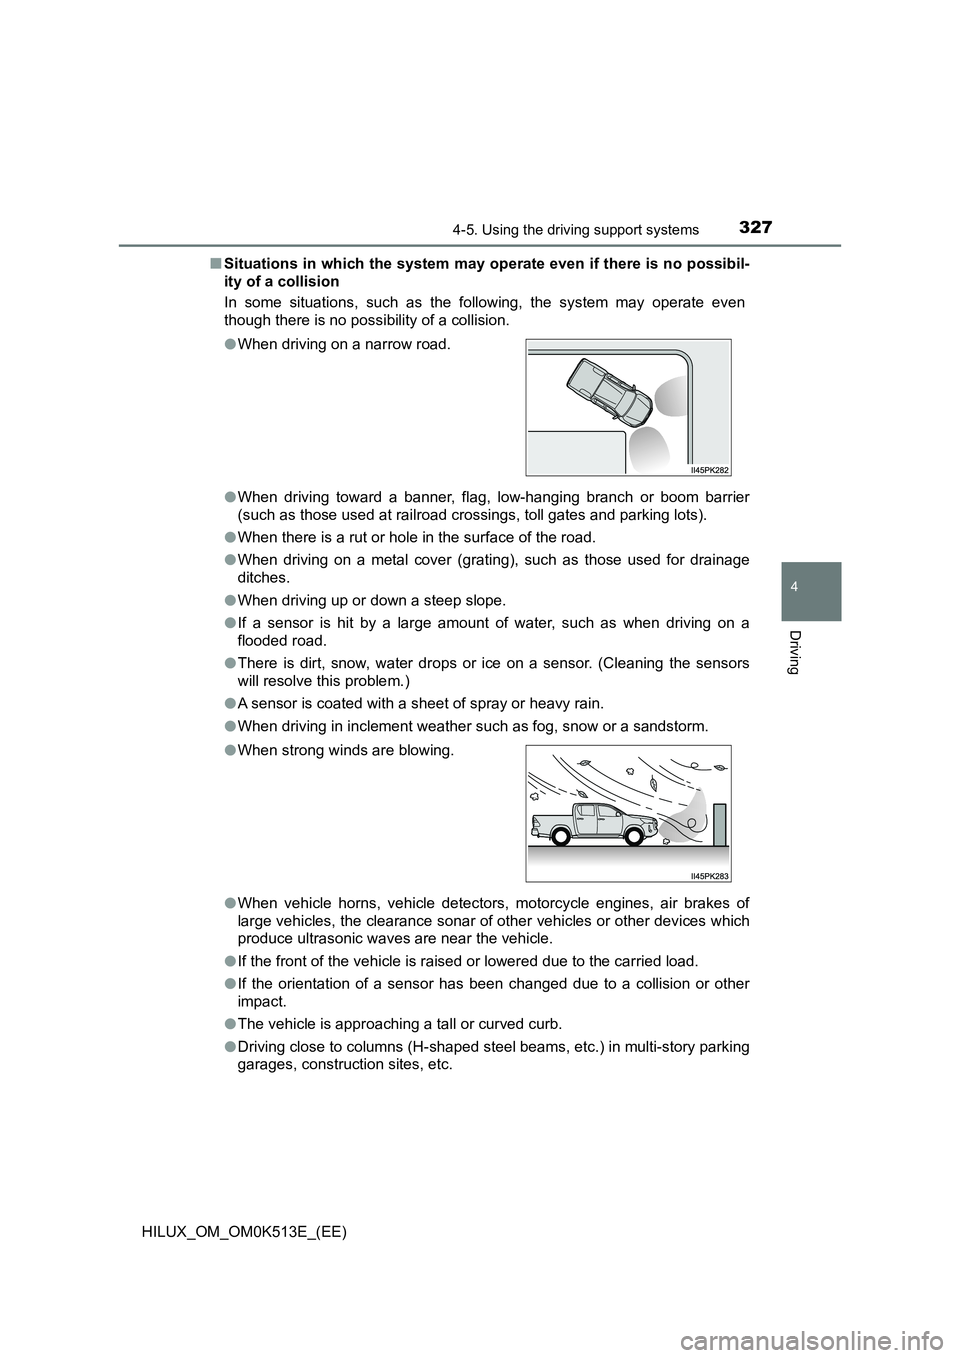 TOYOTA HILUX 2021  Owners Manual (in English) 3274-5. Using the driving support systems
4
Driving
HILUX_OM_OM0K513E_(EE) 
�Q Situations in which the system may operate even if there is no possibil- 
ity of a collision 
In some situations, such as